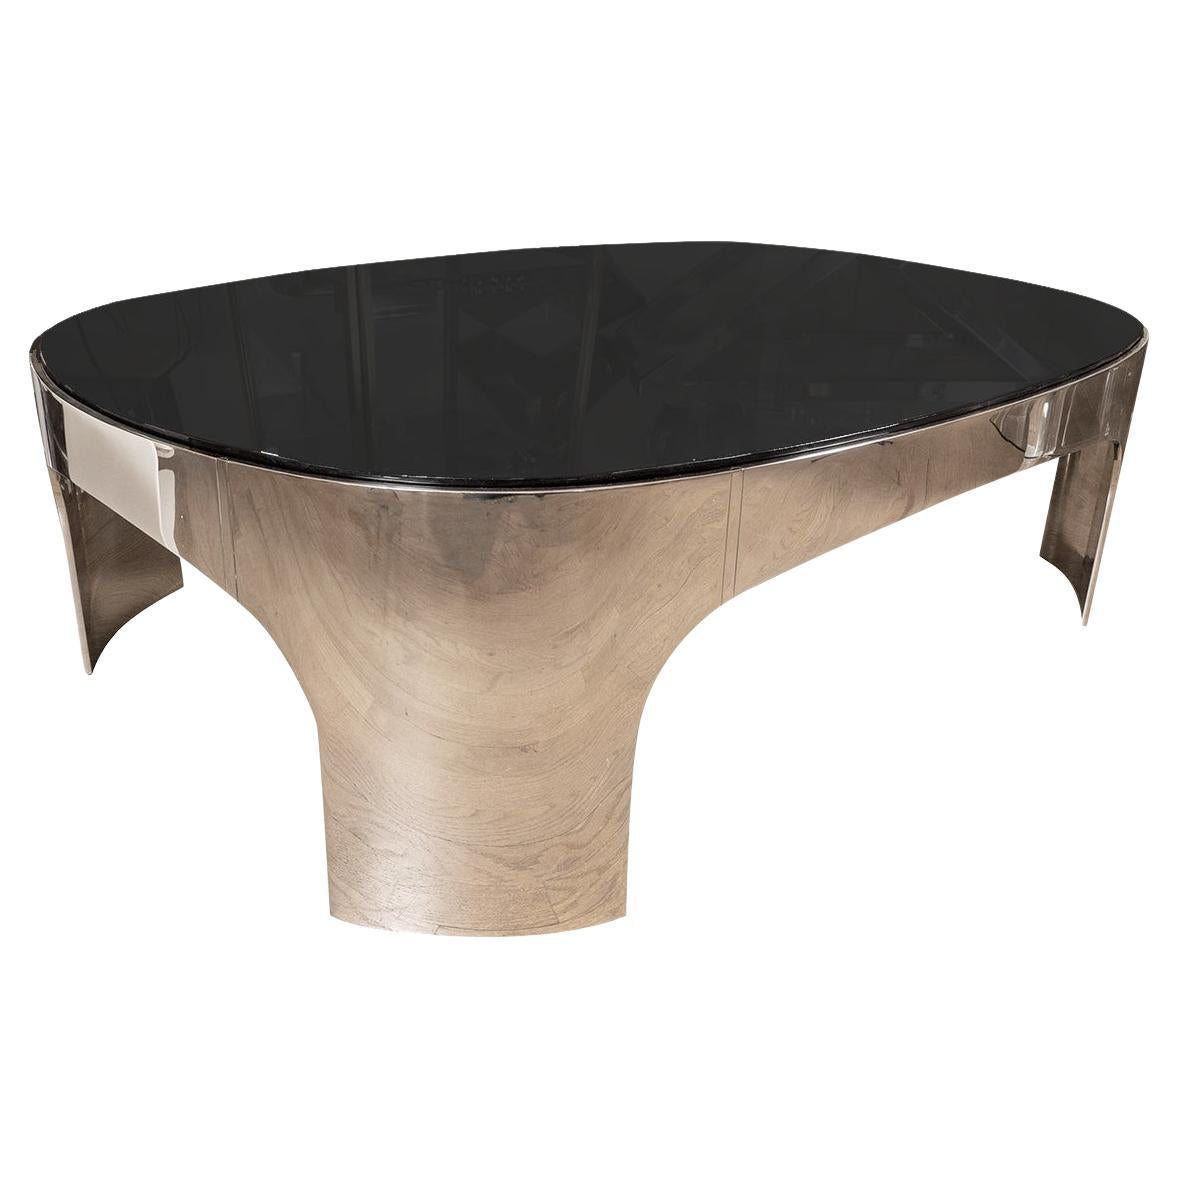 Oval polished stainless steel black glass coffee table For Sale